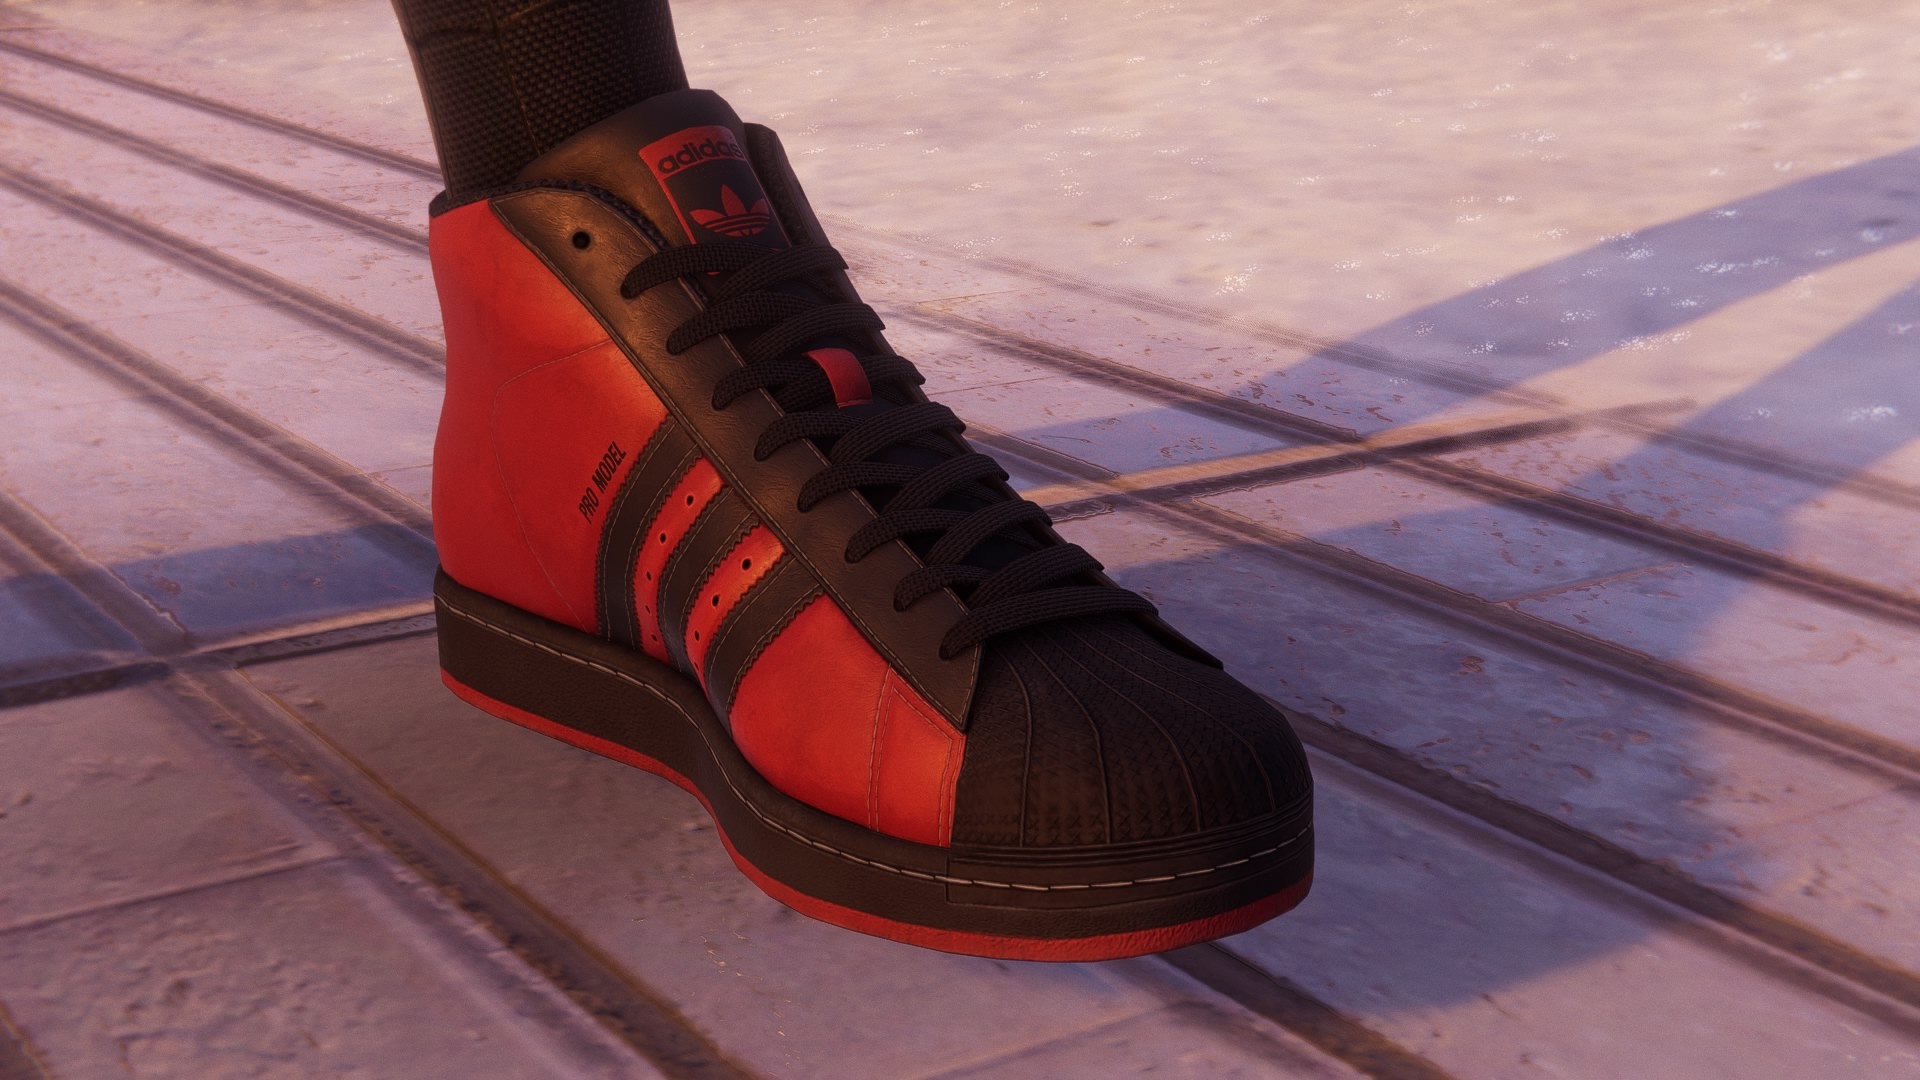 PlayStation teams up with Adidas for Miles Morales' Superstar